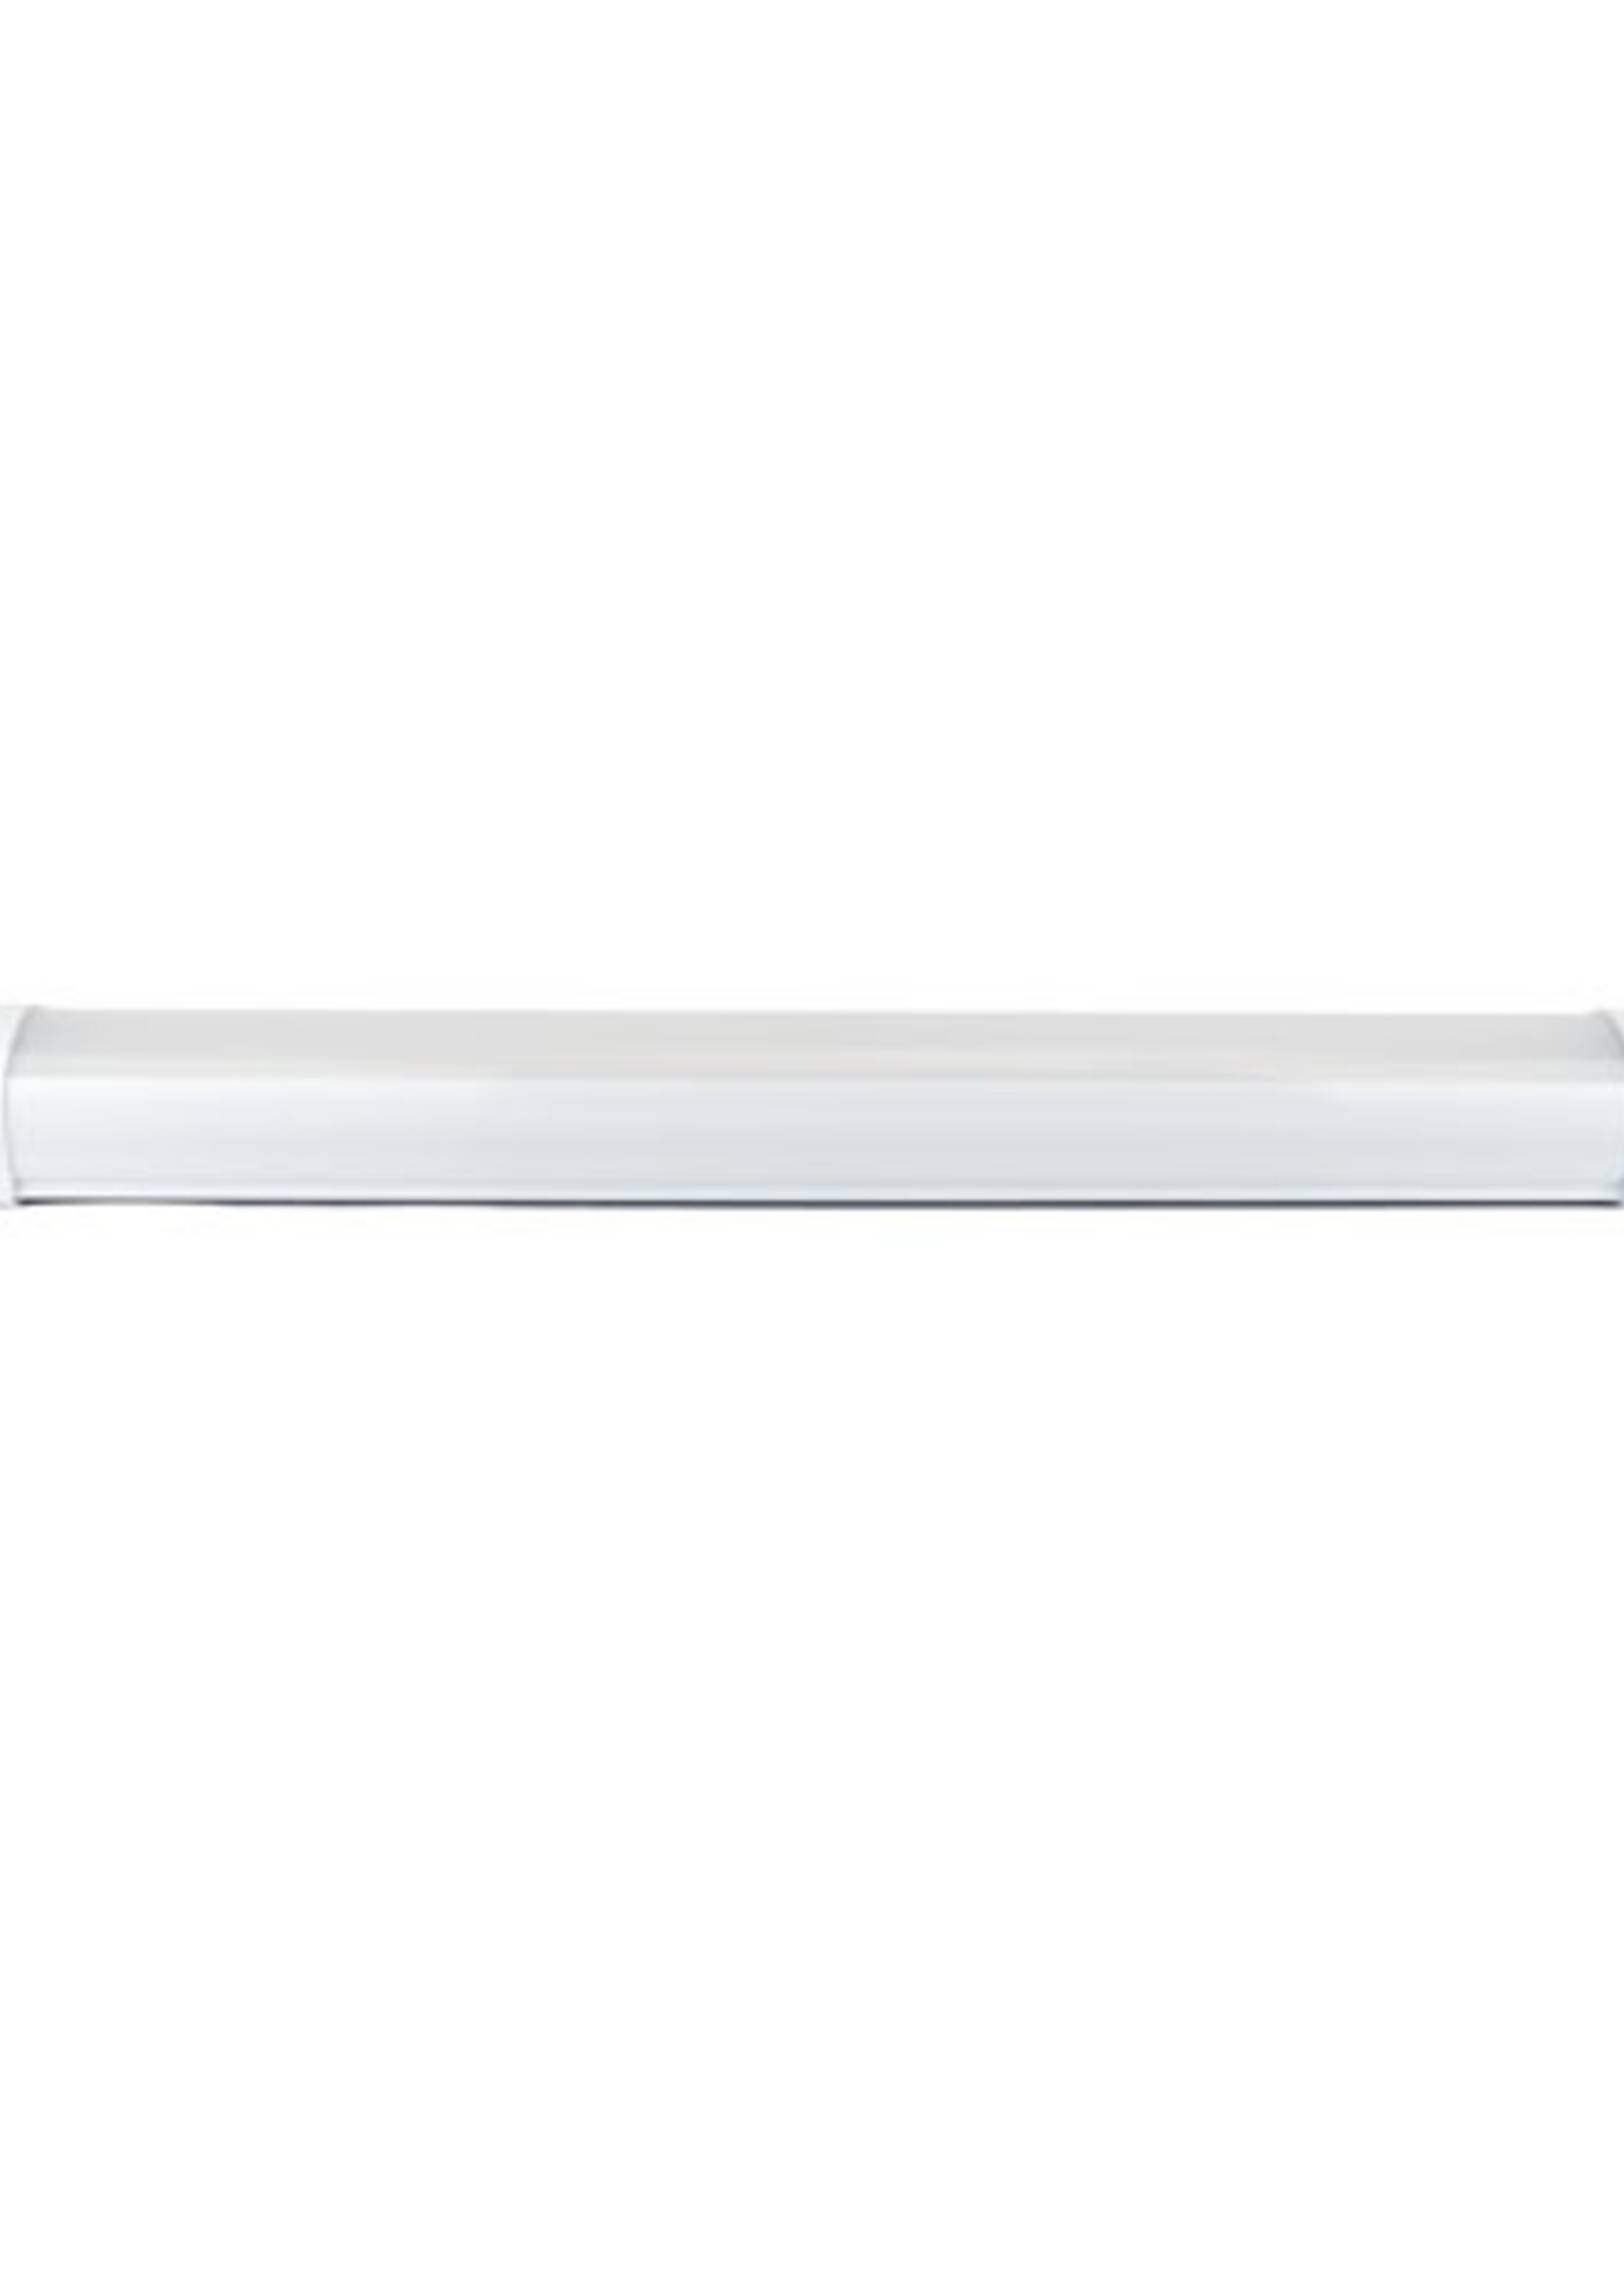 Philips CertaDrive LED Tri-proof IP65 water resistant 122cm 36W Philips driver